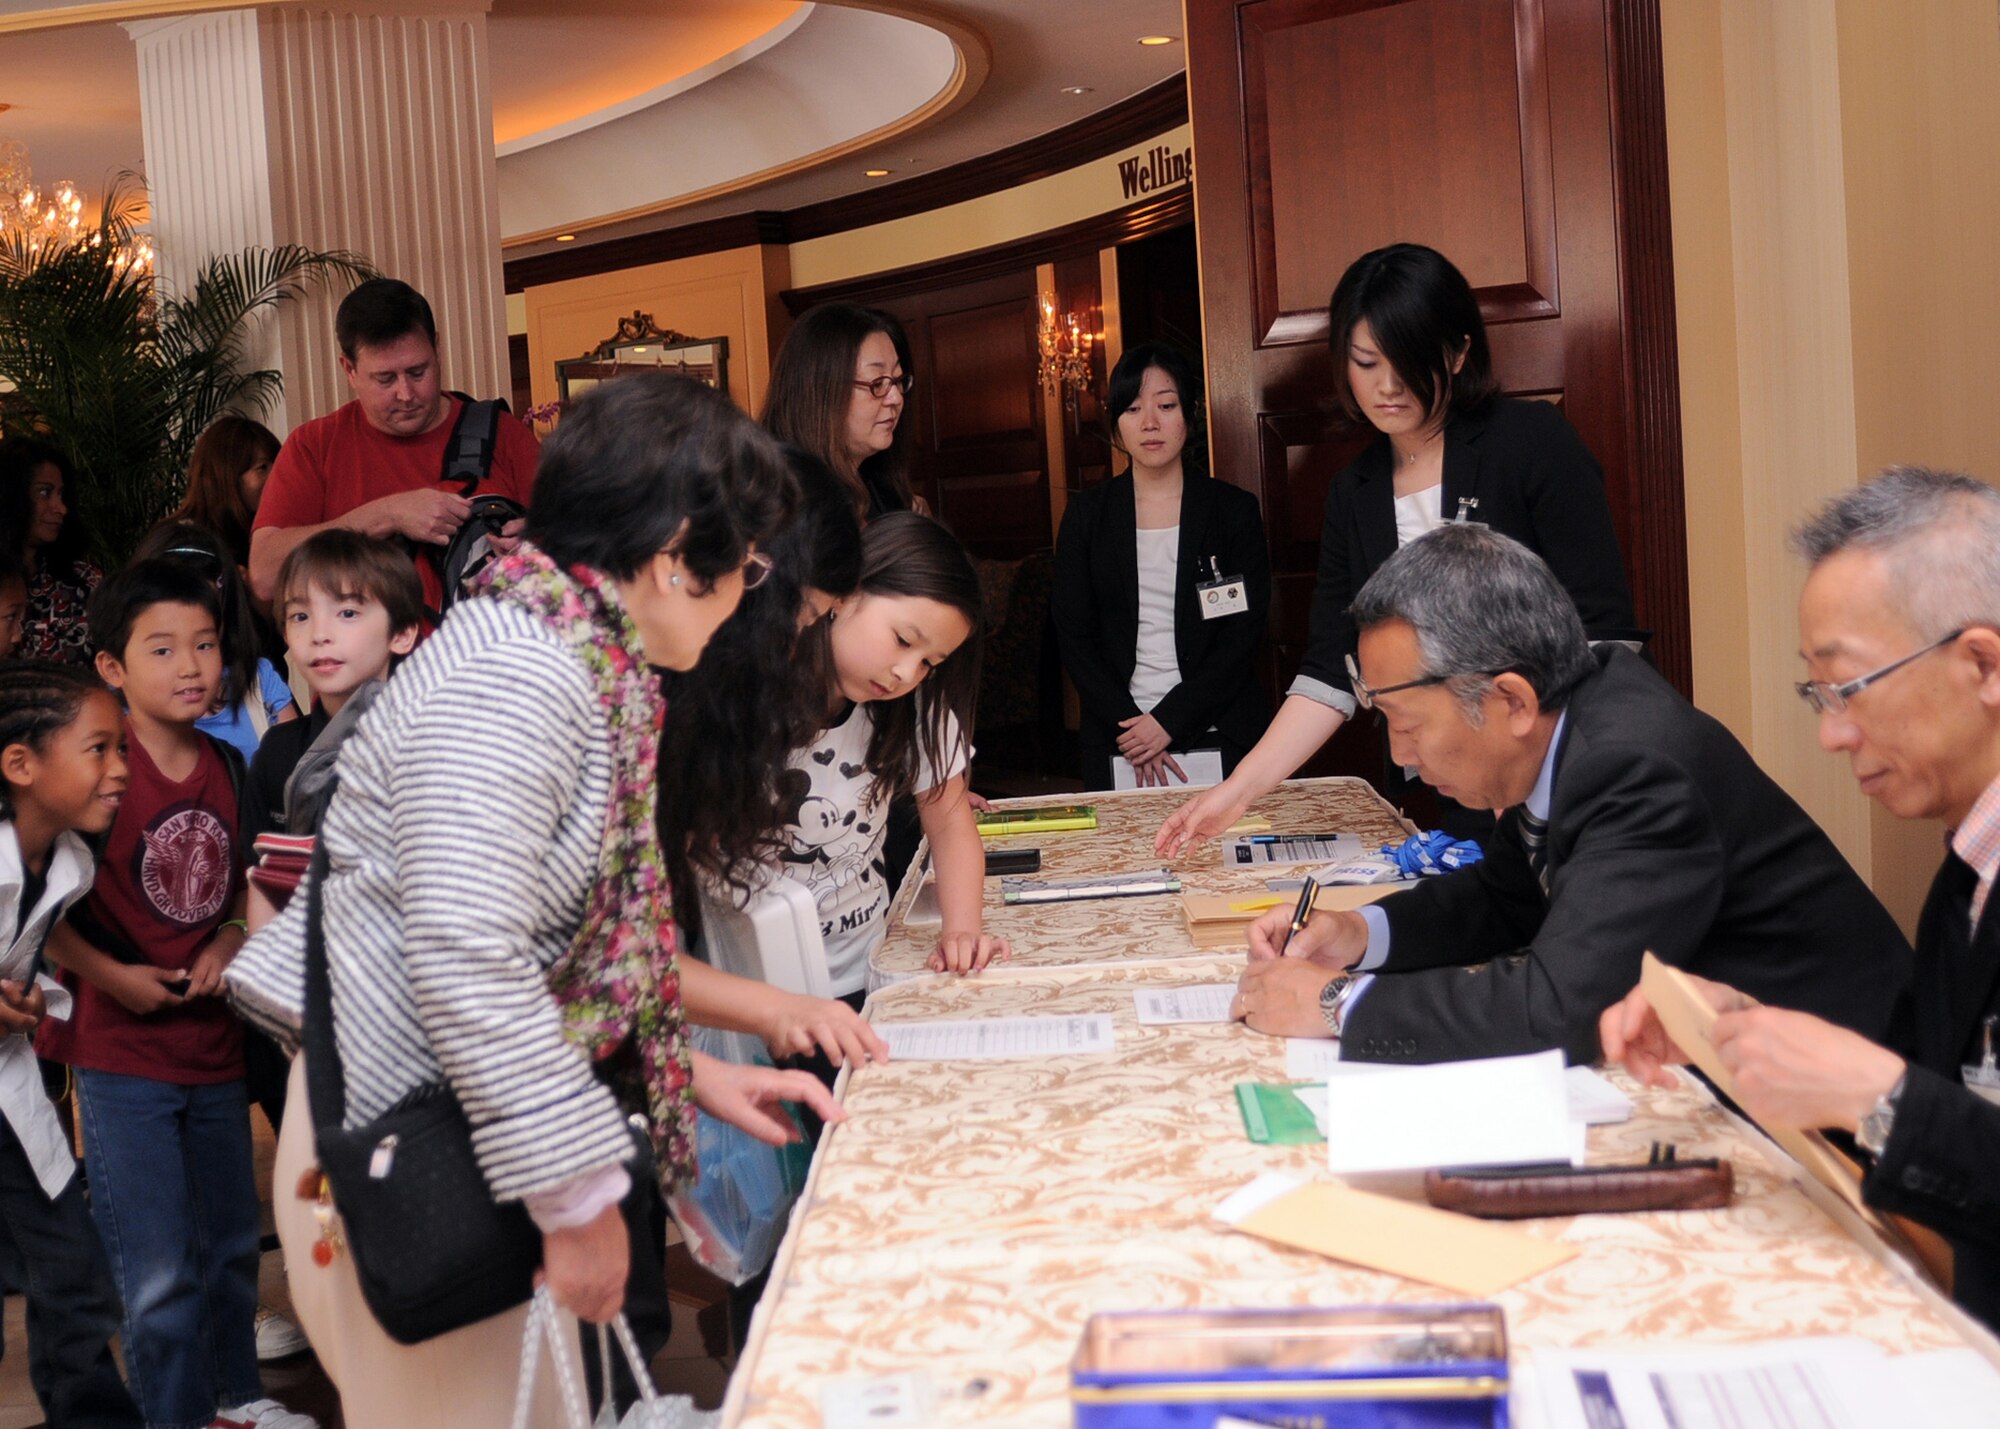 ROPPONGI, Japan -- Students register for the 29th Kanto Area Department of Defense Dependent Students soroban contest May 25, 2011 at the New Sanno hotel, Roppongi, Japan. DoDDS students, including those from Yokota elementary and middle schools, showcased their math skills with a Japanese version of an abacus, called the soroban. (U.S. Air Force photo/Senior Airman Andrea Salazar)